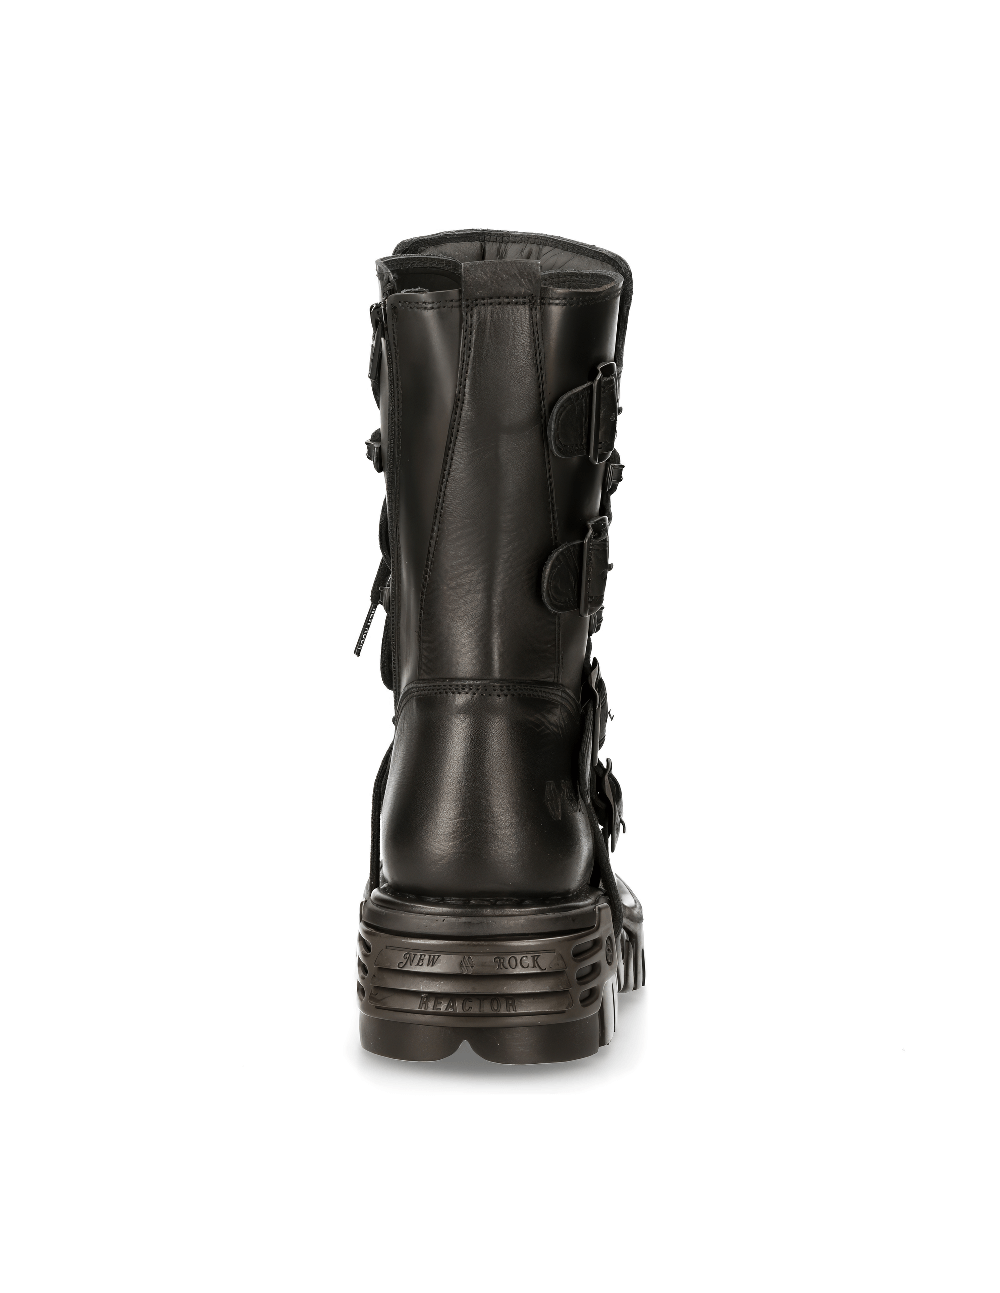 NEW ROCK Gothic Black Leather Boots with Metallic Details